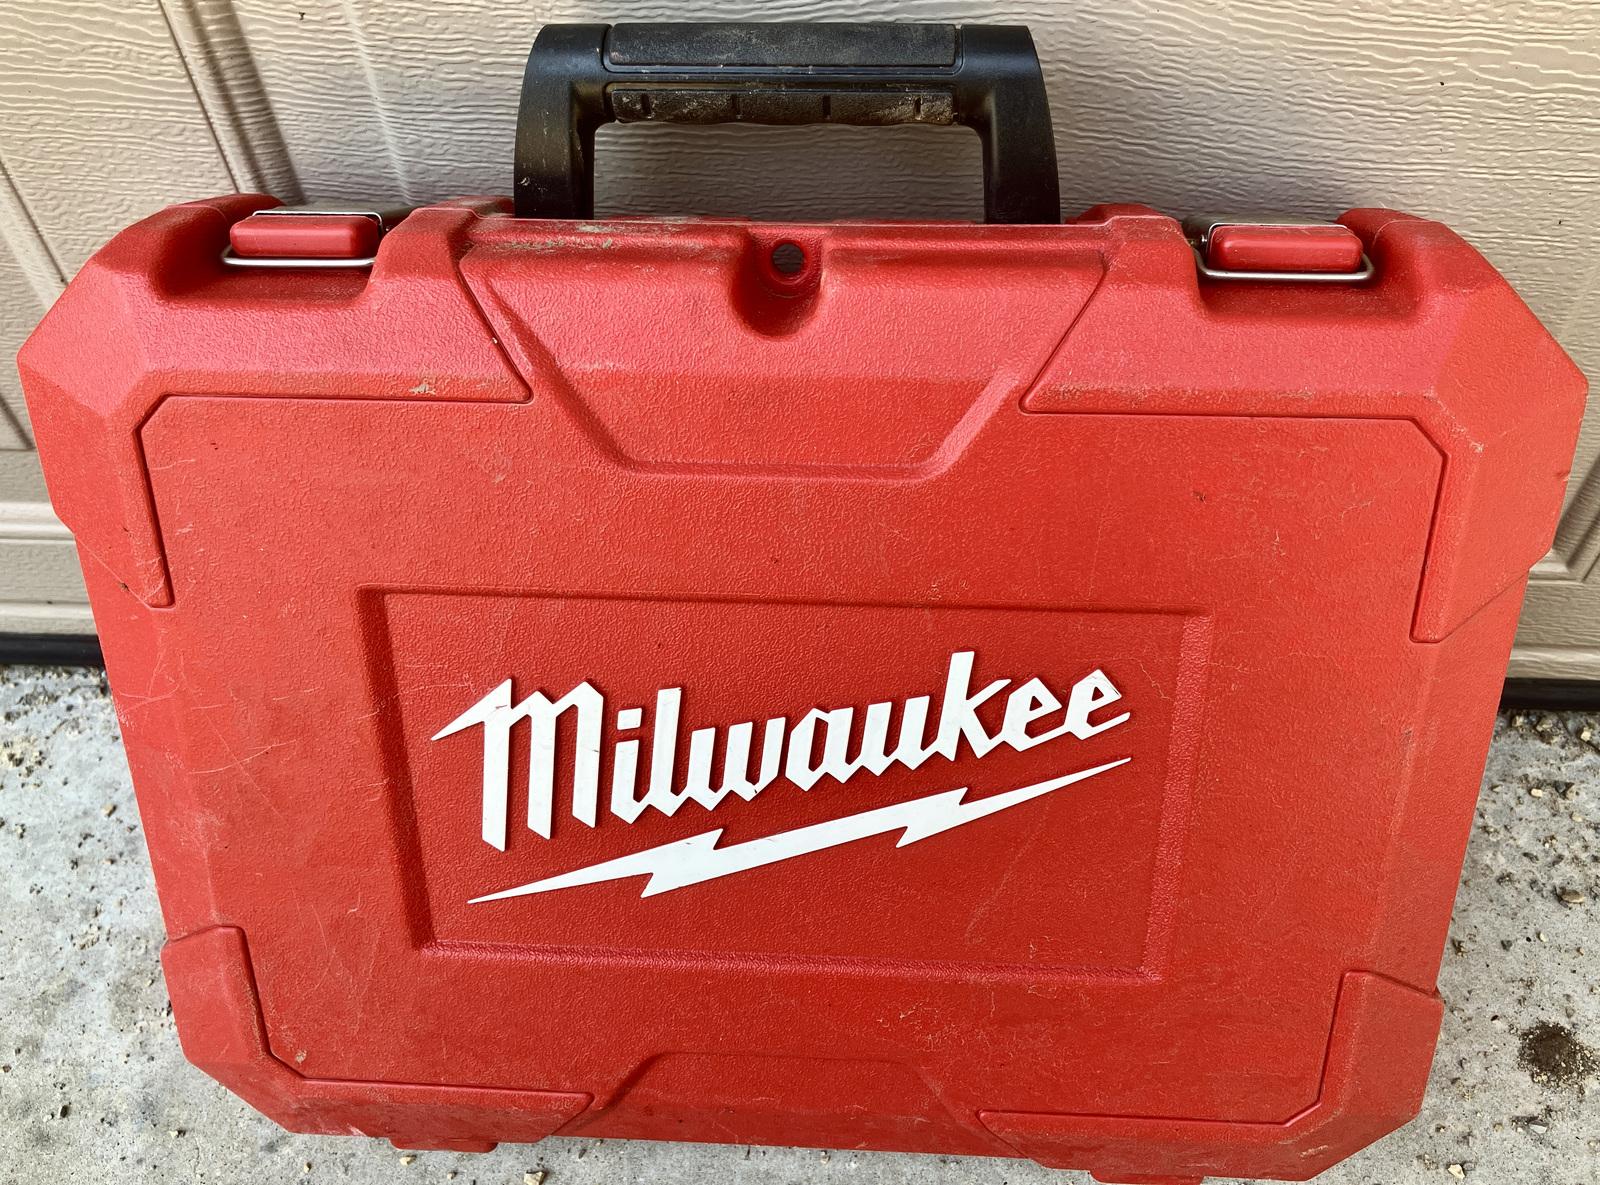 Milwaukee carry case storage box for cordless drill 18 volt etc...  - $14.95